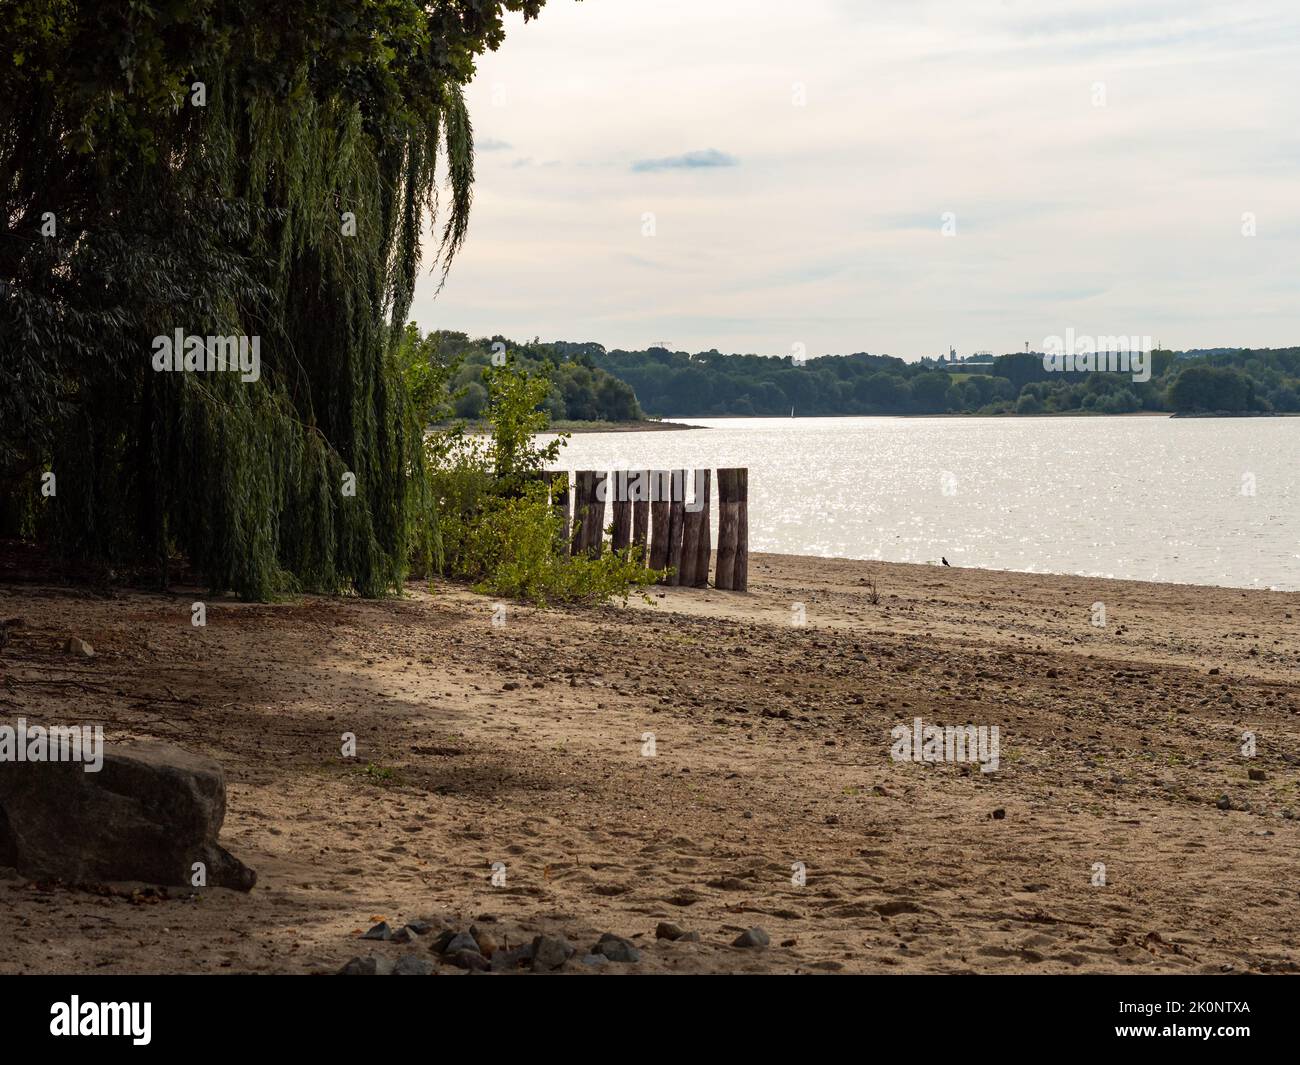 Beach landscape with wooden wave breakers and big trees. The calm water of the Bautzen Reservoir is glowing in the sunlight. A sandy bathing beach. Stock Photo